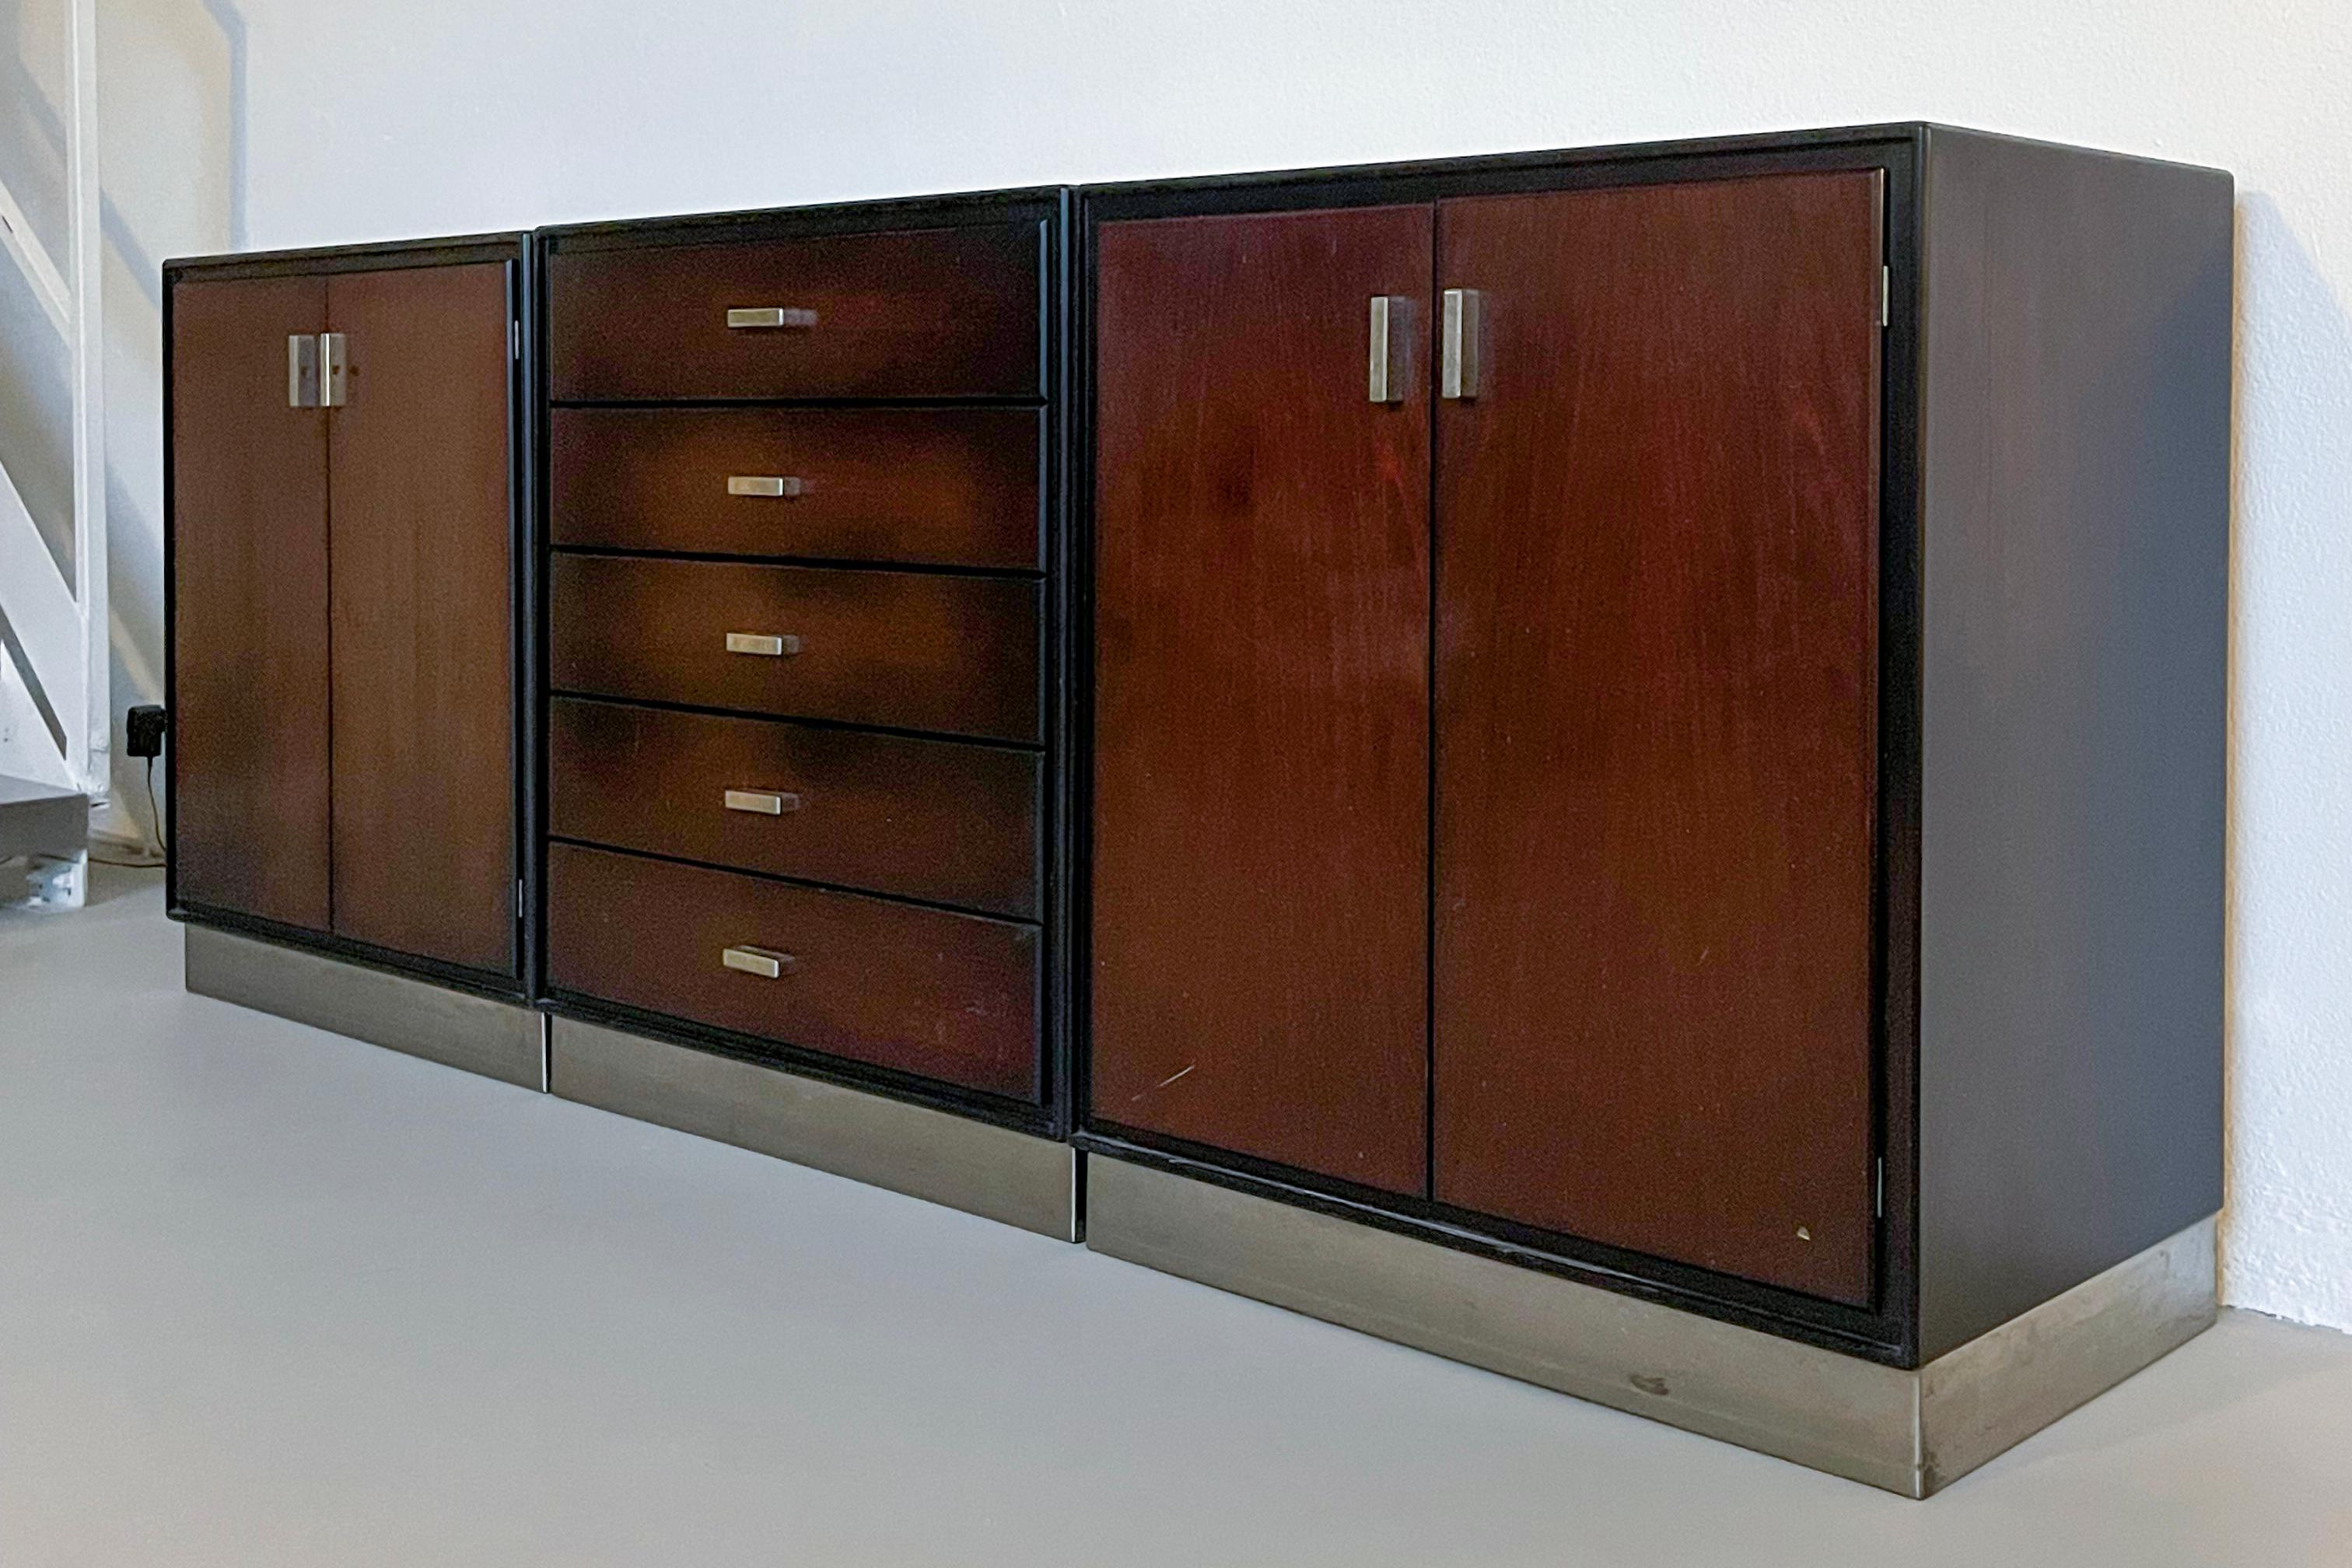 Mid-Century Modern Sideboard - Italian Collectible Design - Dark Wood Cabinets

Set of three modular cabinets/sideboard, designed by Gianni Moscatelli for Italian furniture brand Formanova. Crafted in solid wood with stainless steel details,